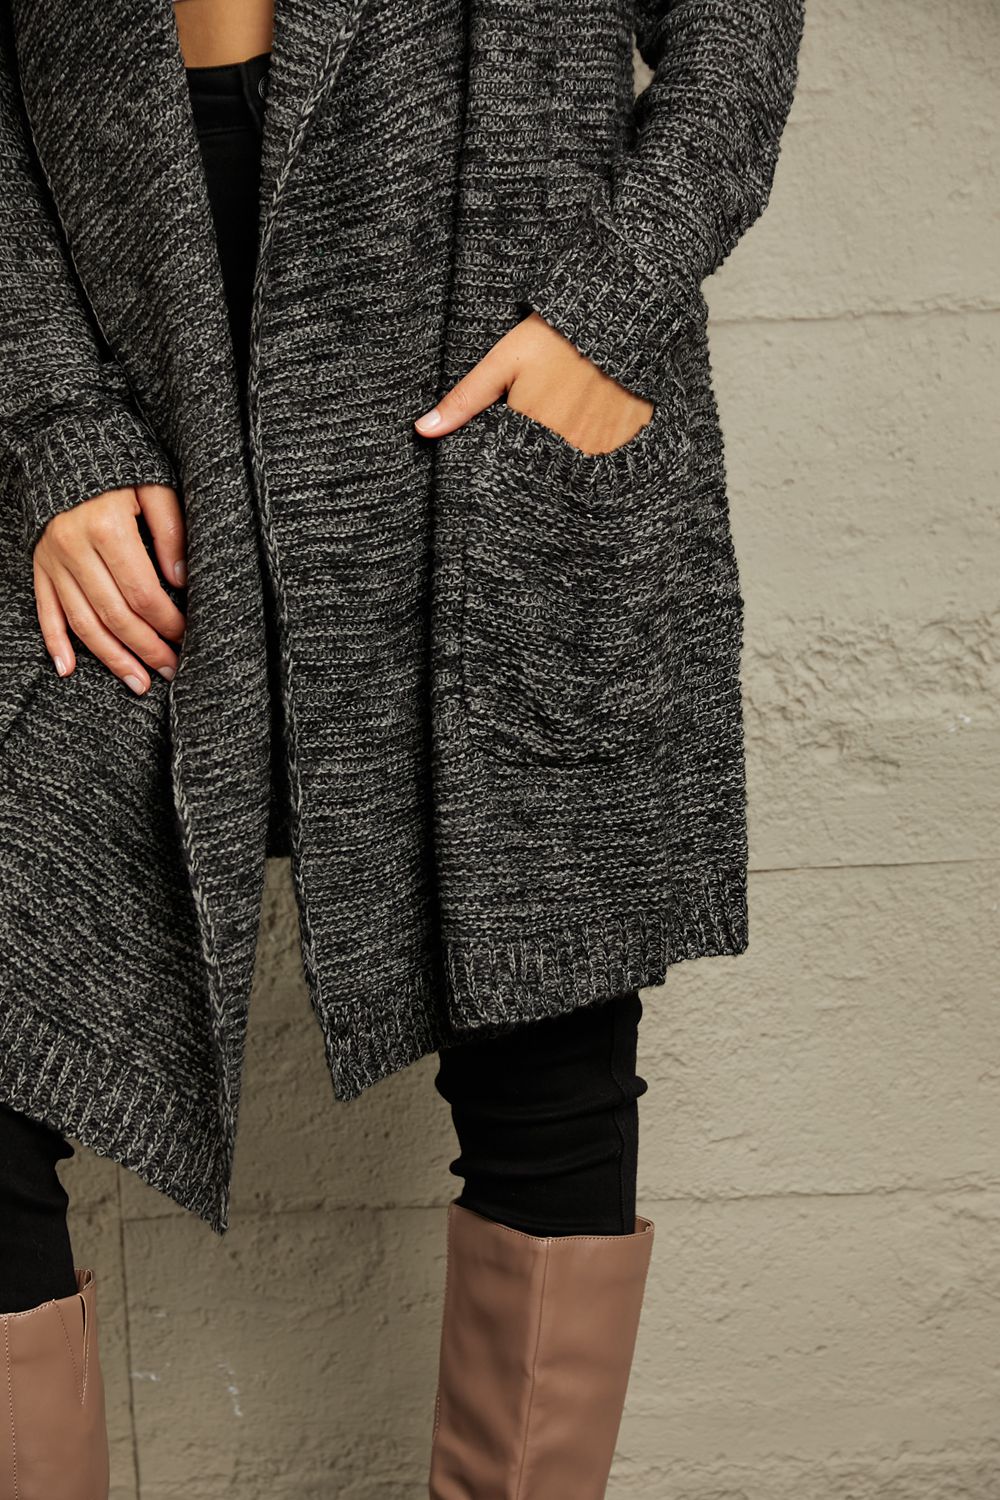 This cardigan envelops you in warmth while exuding a relaxed, yet chic vibe. Its chunky knit texture adds a touch of rustic charm, making it a versatile piece for both casual outings and snug nights in.